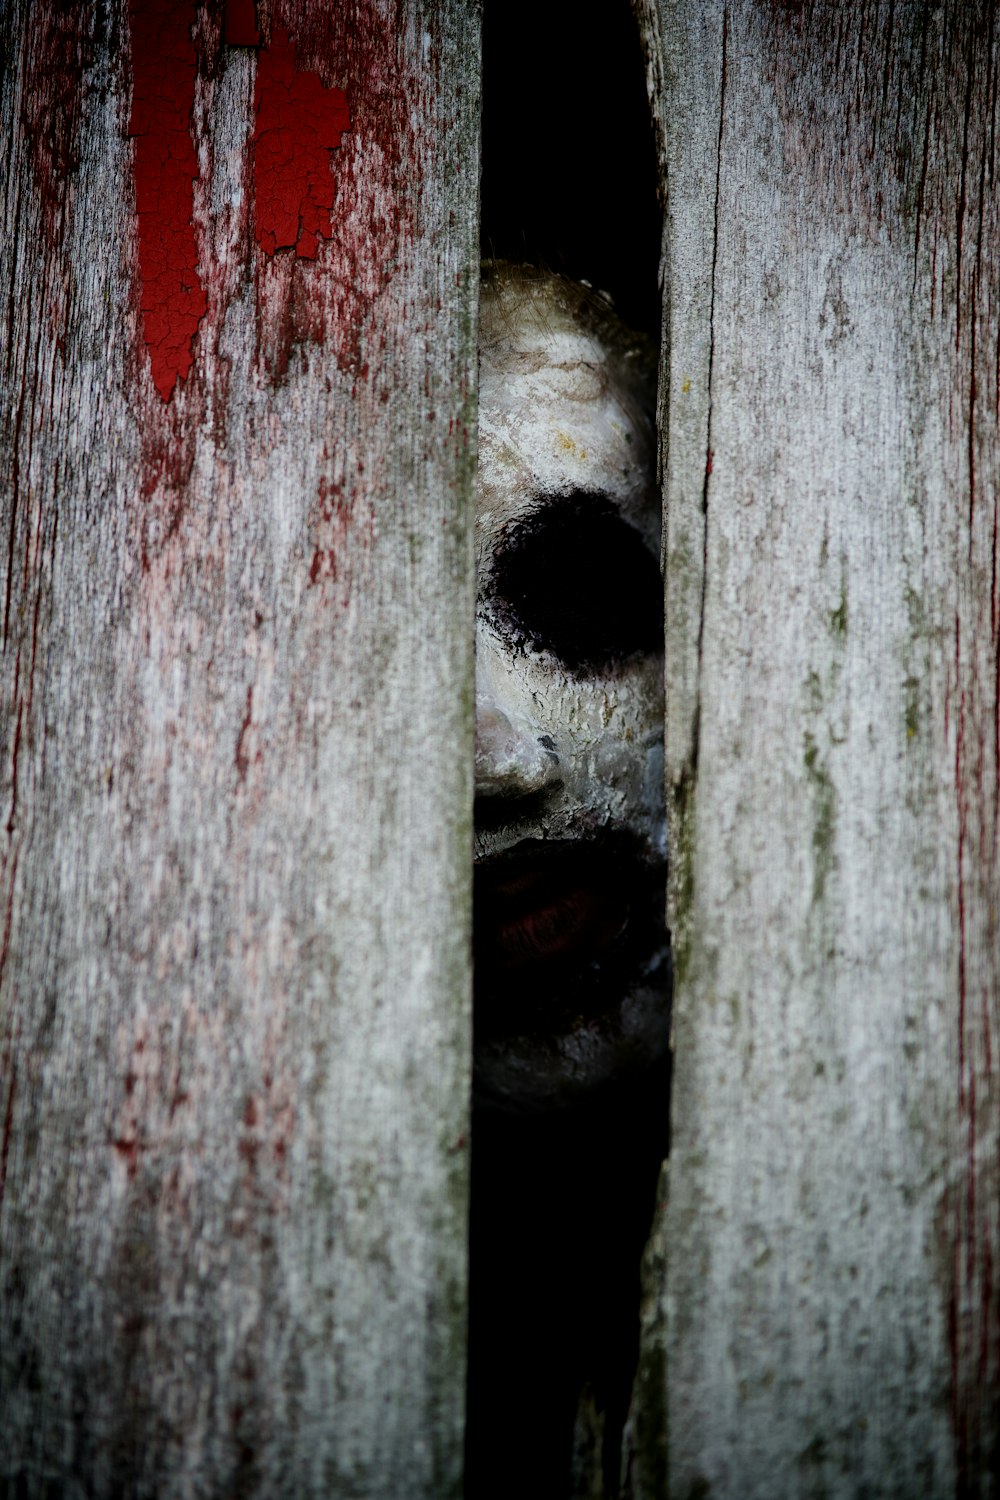 a creepy looking face peeking out of a wooden door